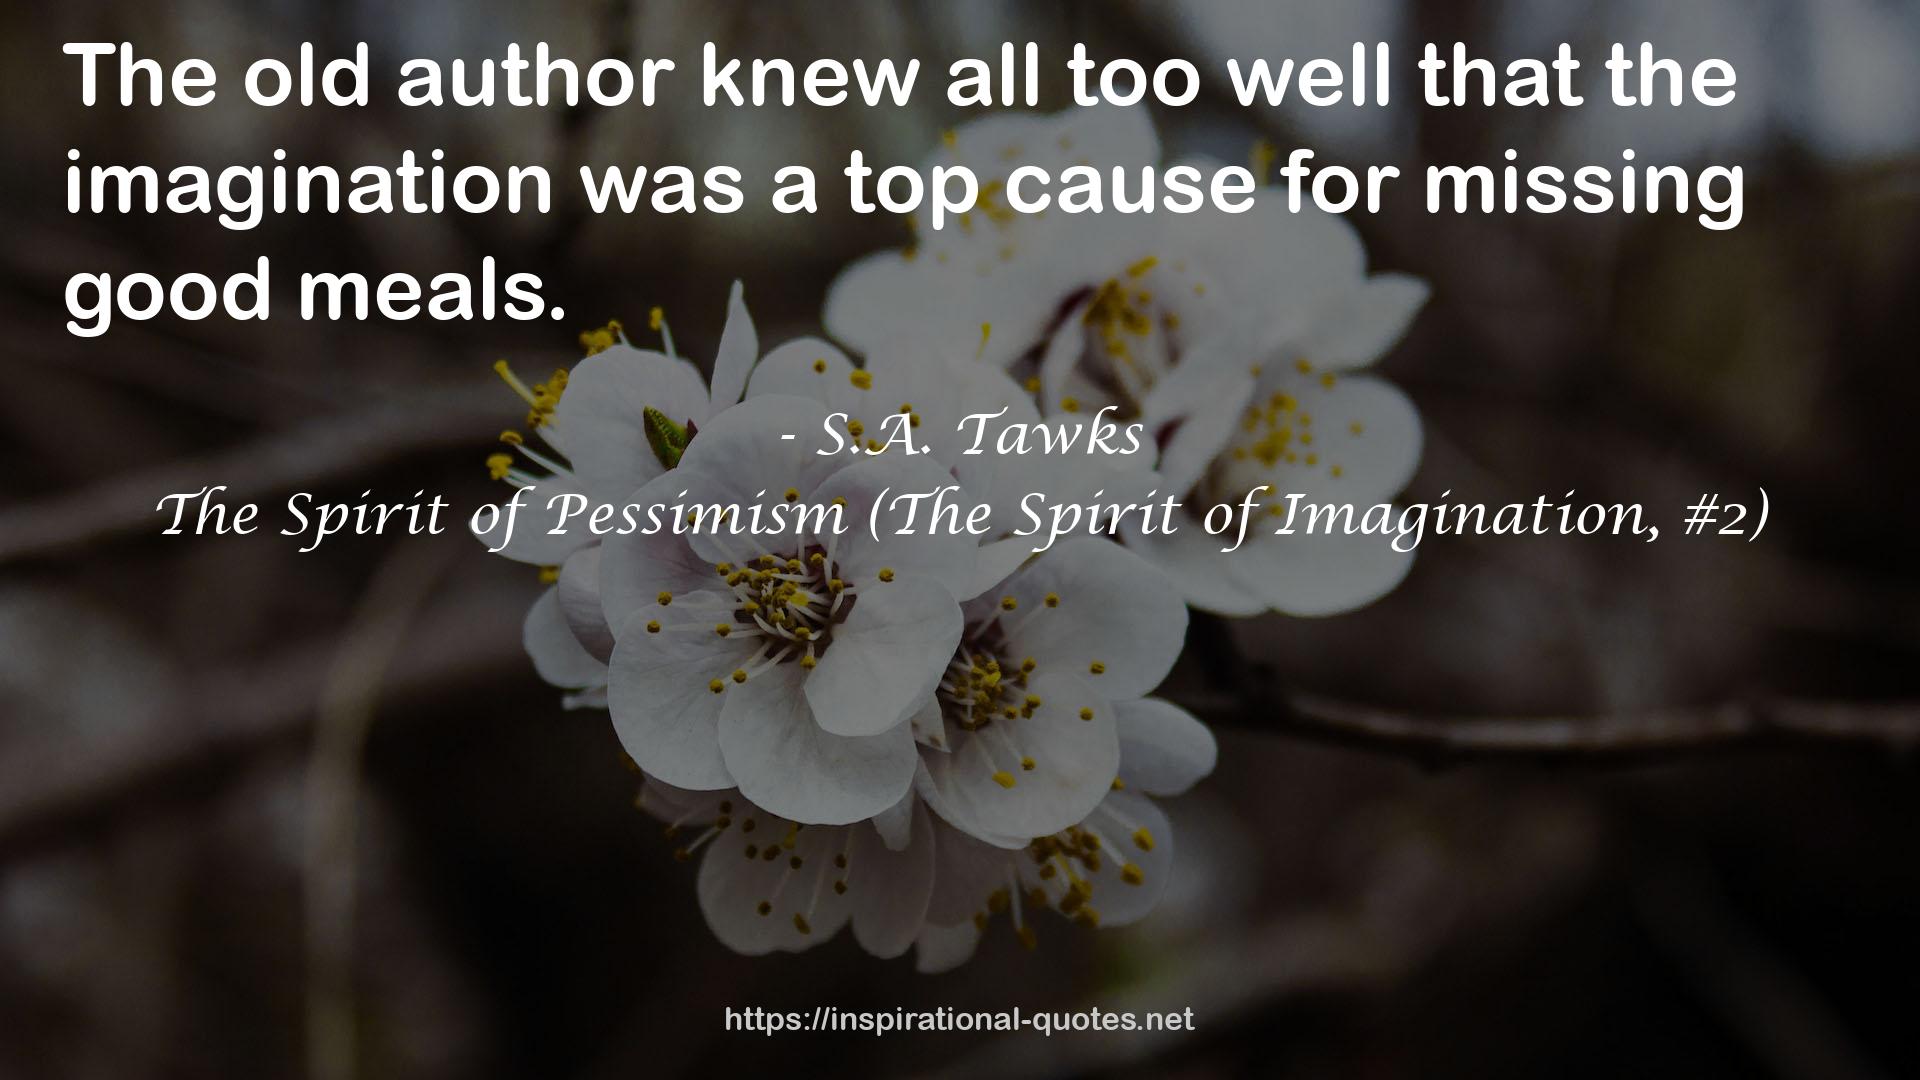 S.A. Tawks QUOTES